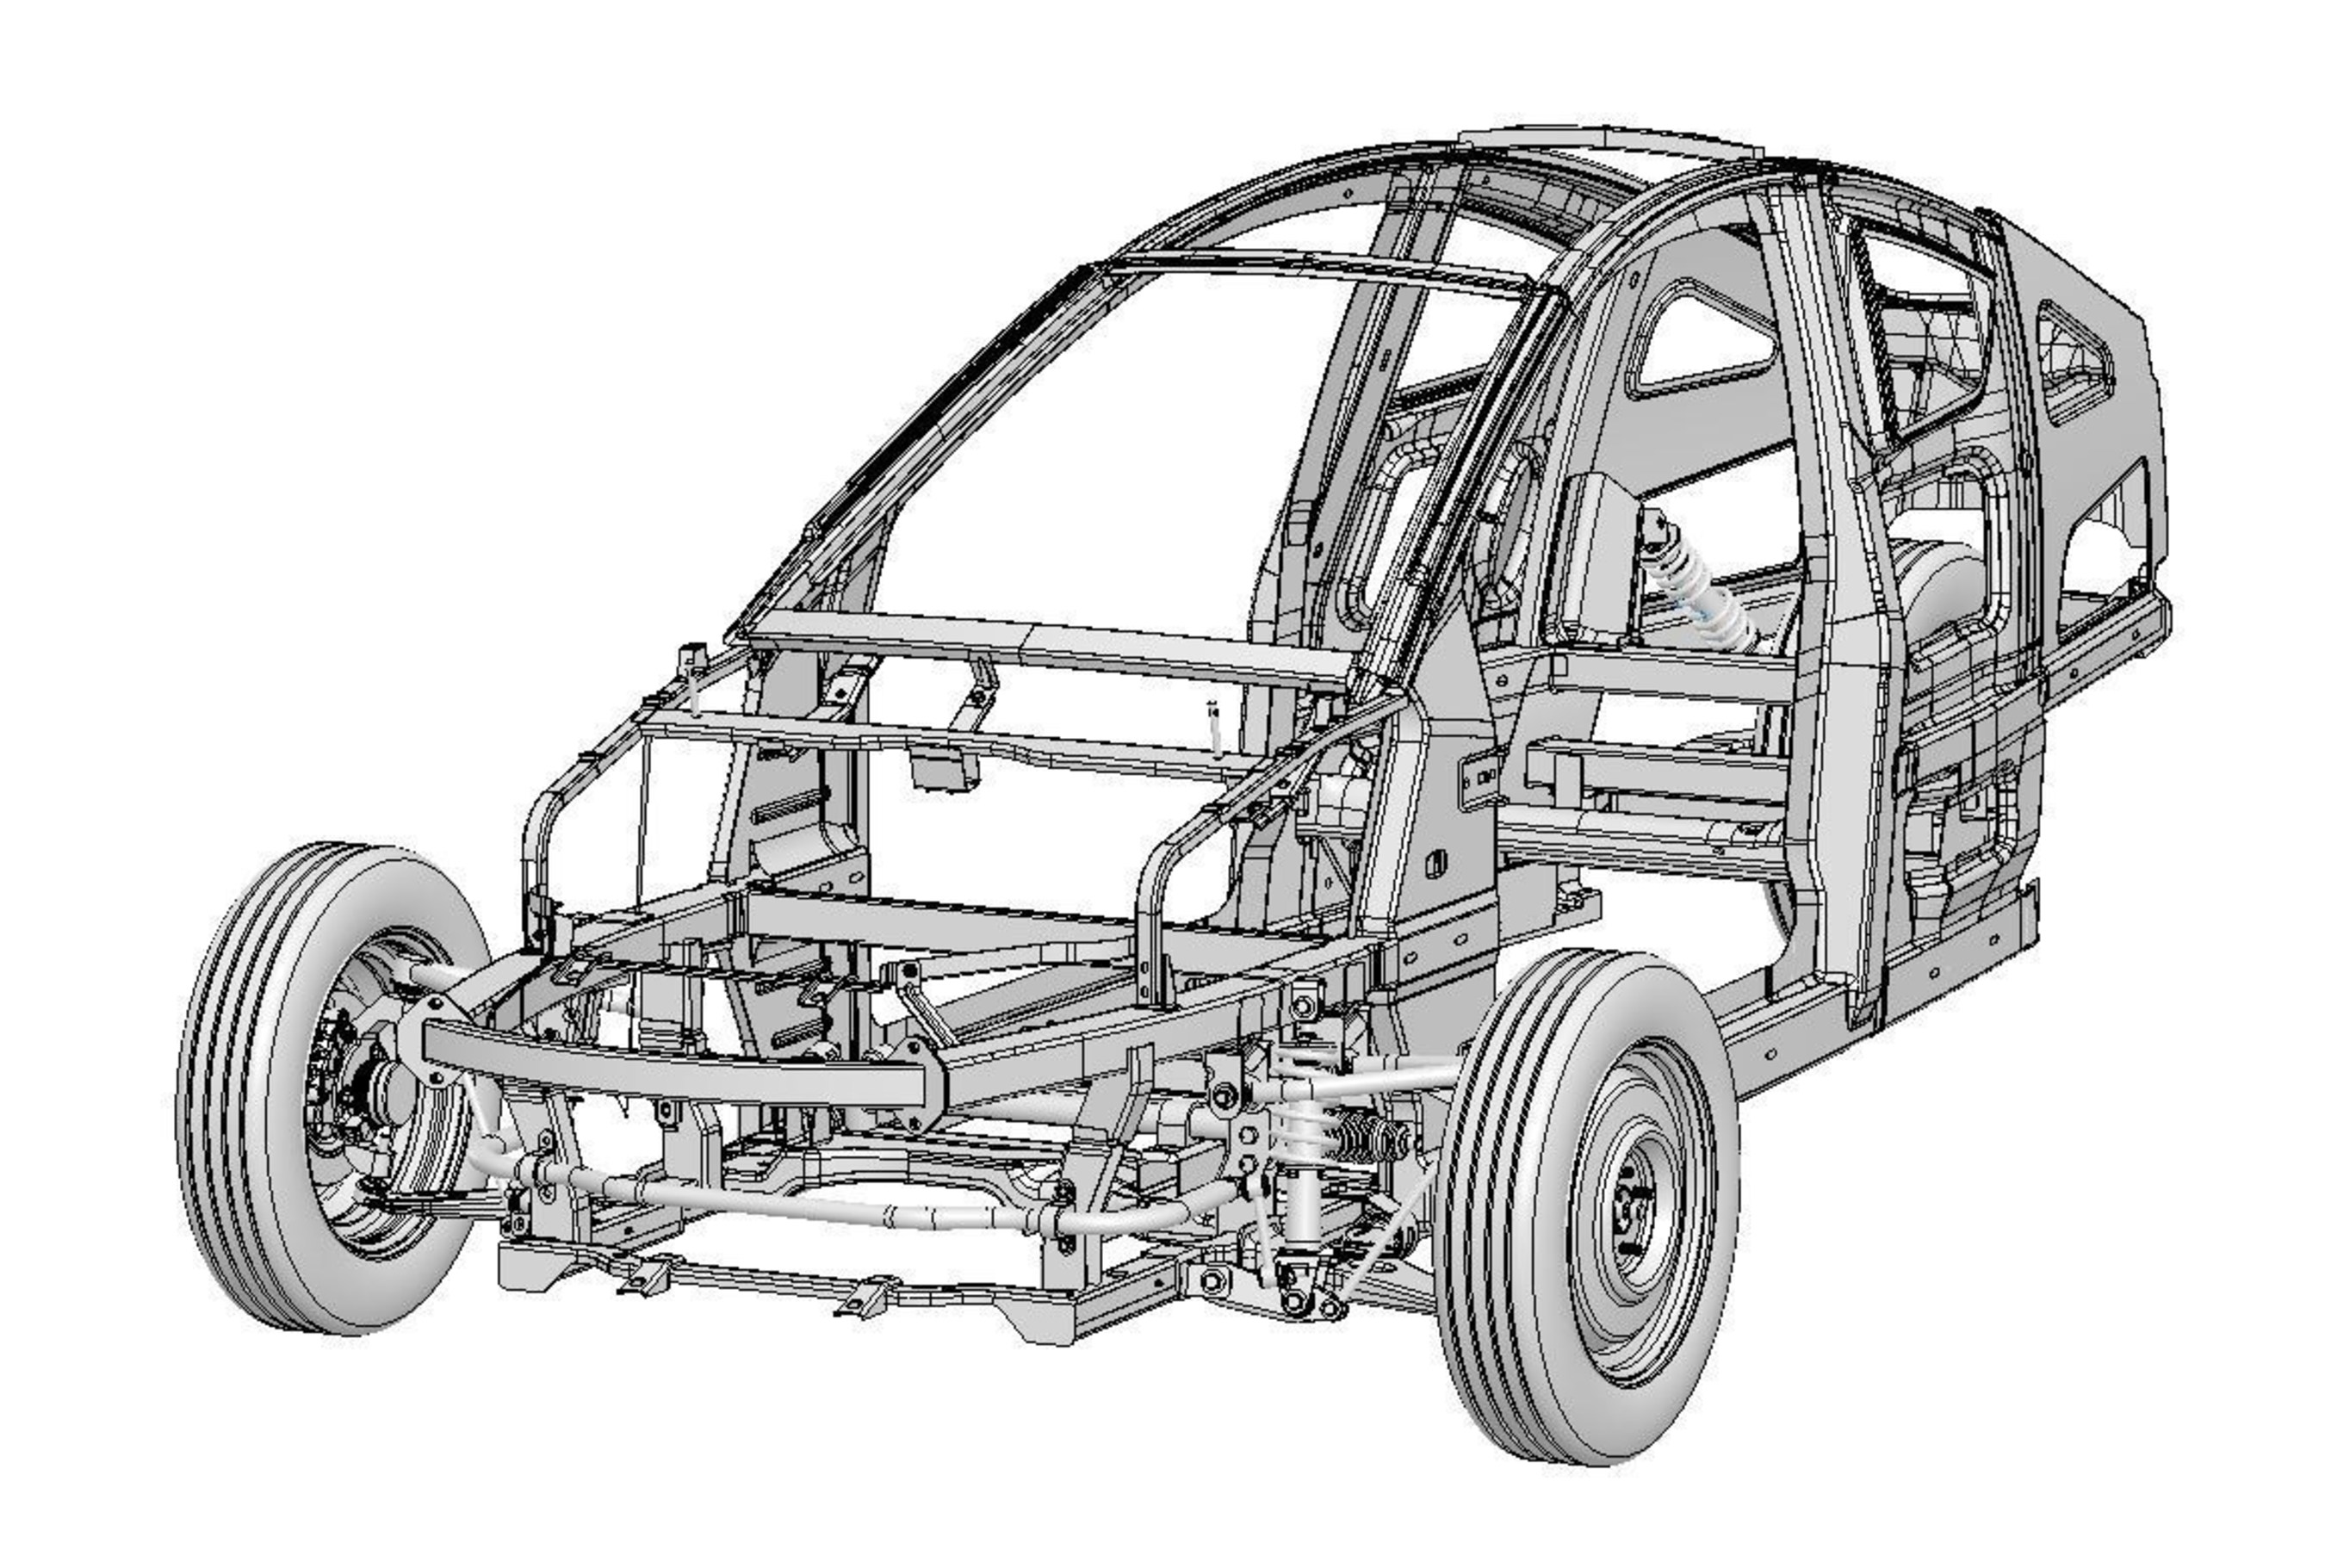 Elio Motors Completes Final Stage of Engineering for E-Series Vehicles with Chassis Design